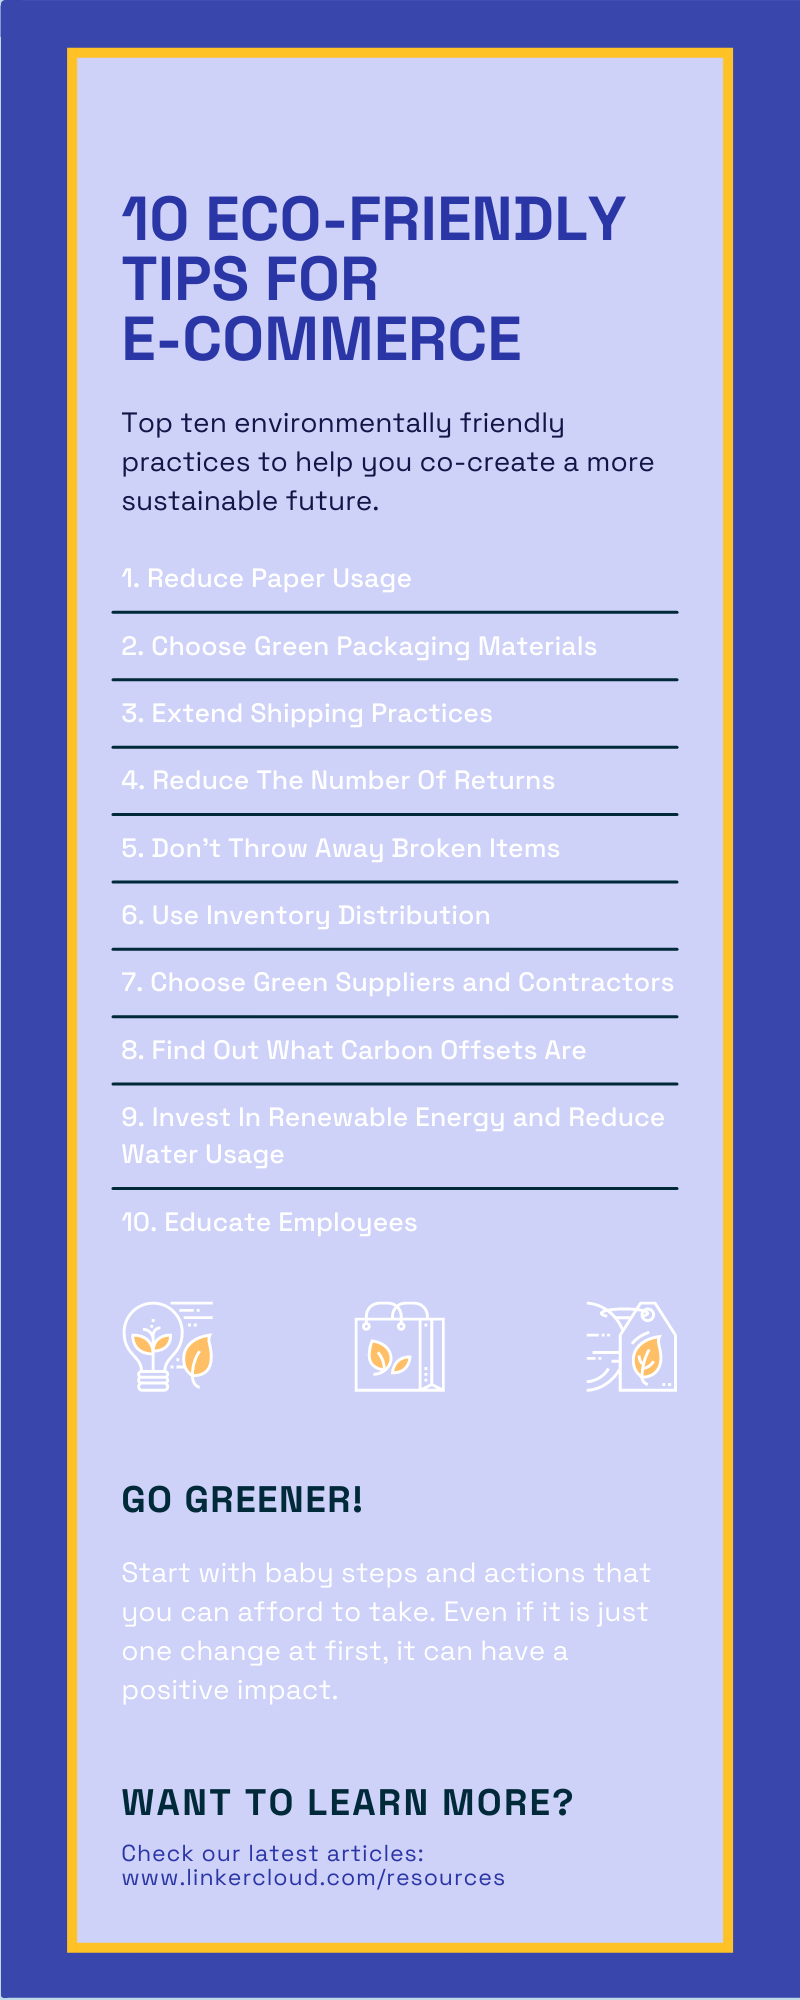 10 eco friendly tips for ecommerce: infographic with checklist.